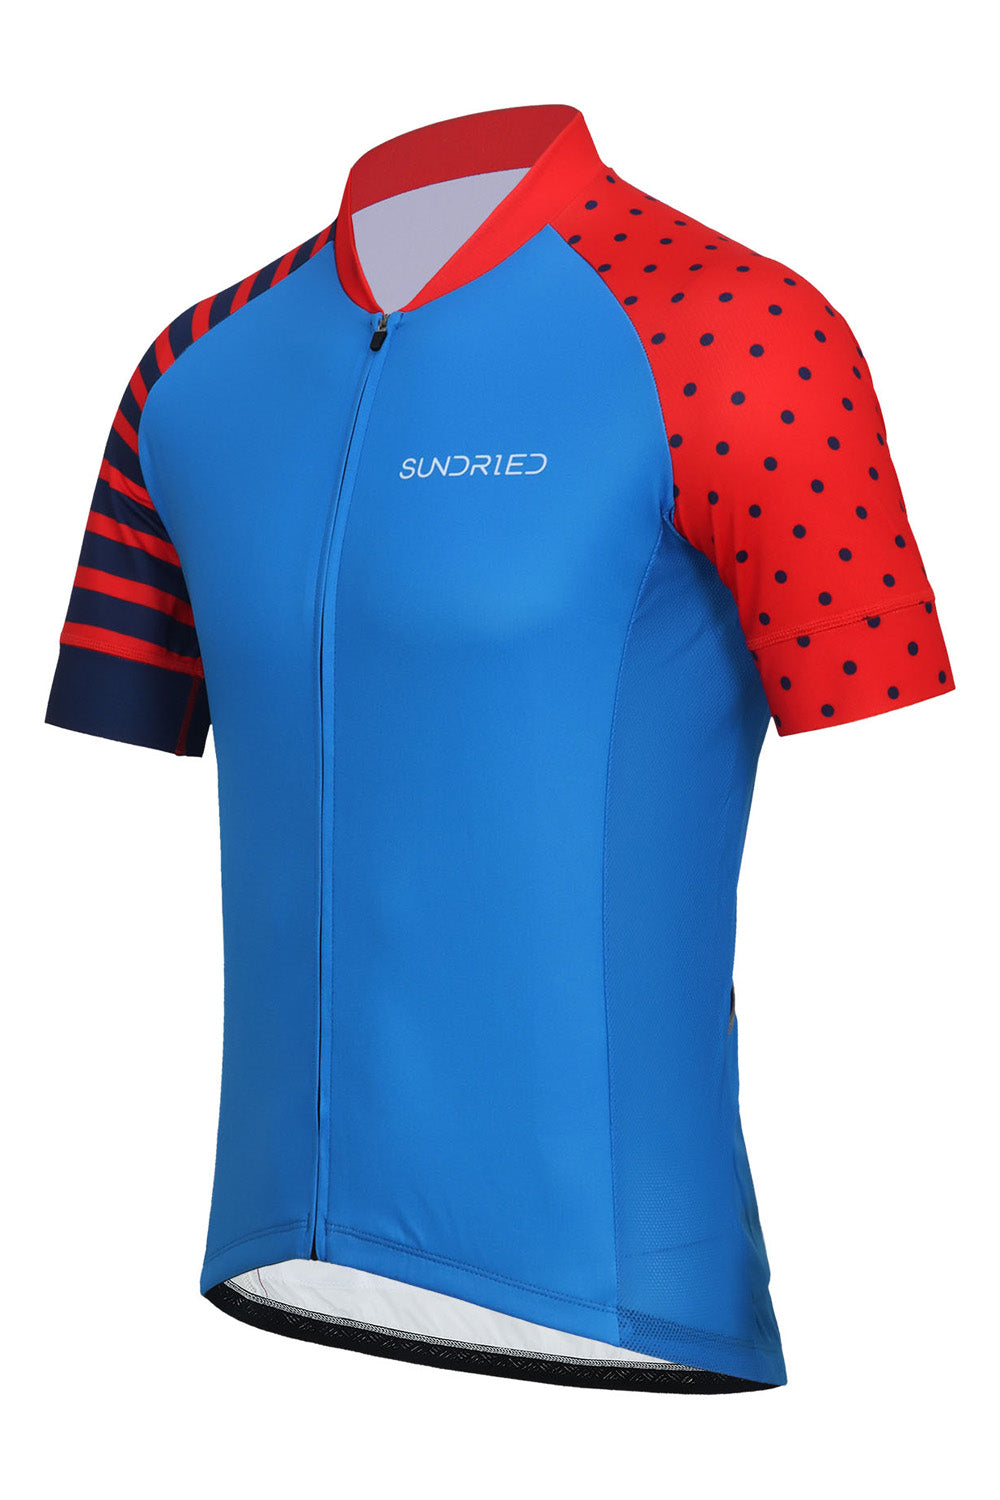 Sundried Spots and Stripes Men's Short Sleeve Cycle Jersey Short Sleeve Jersey Activewear